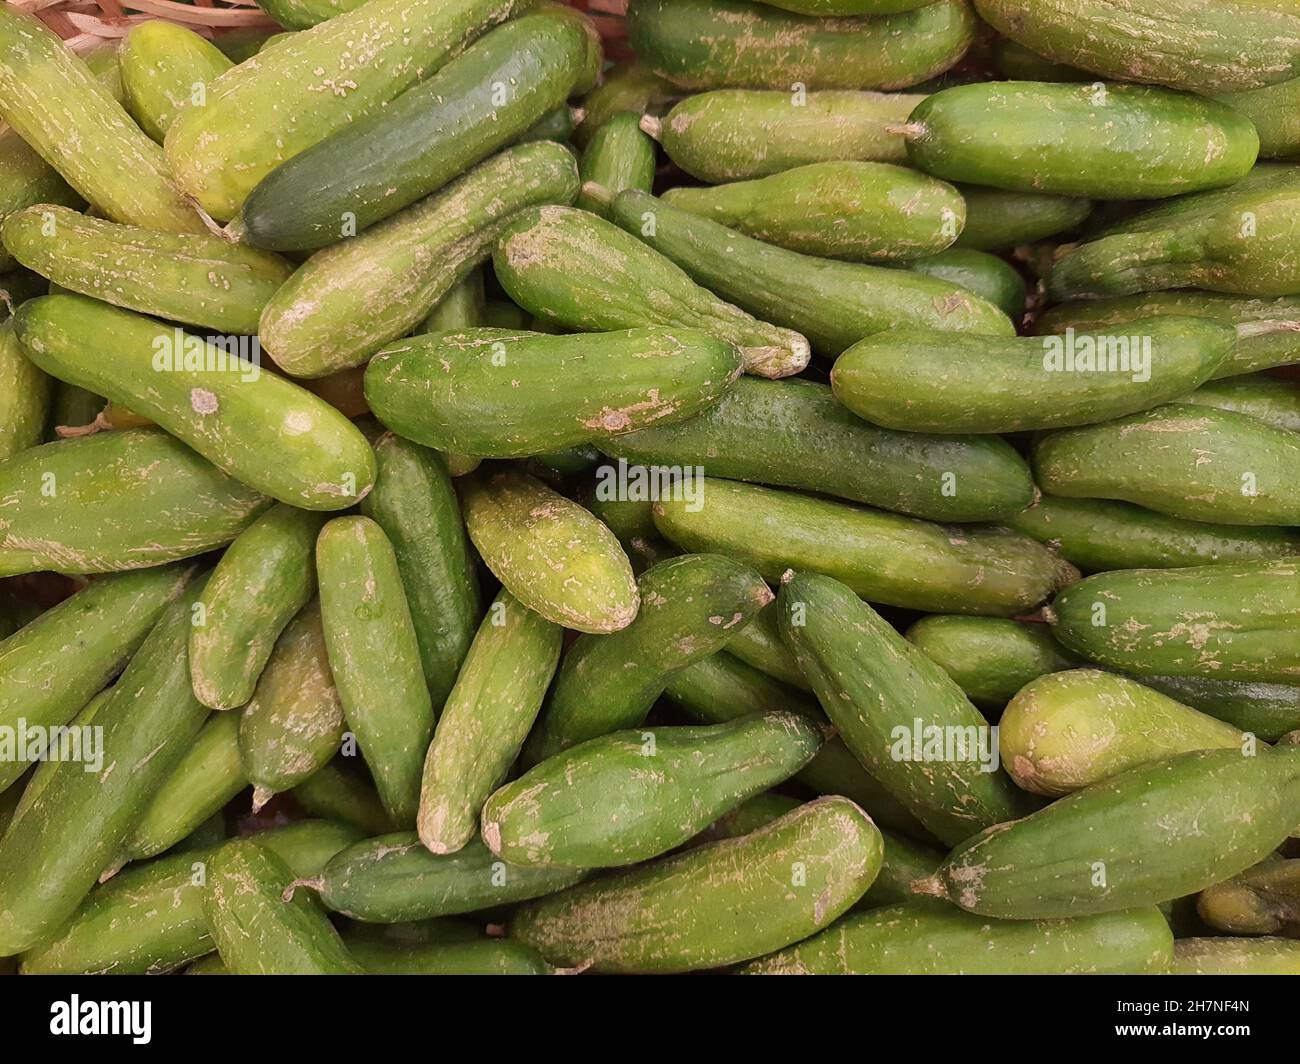 Full screen of cucumbers in a market. Stock Photo